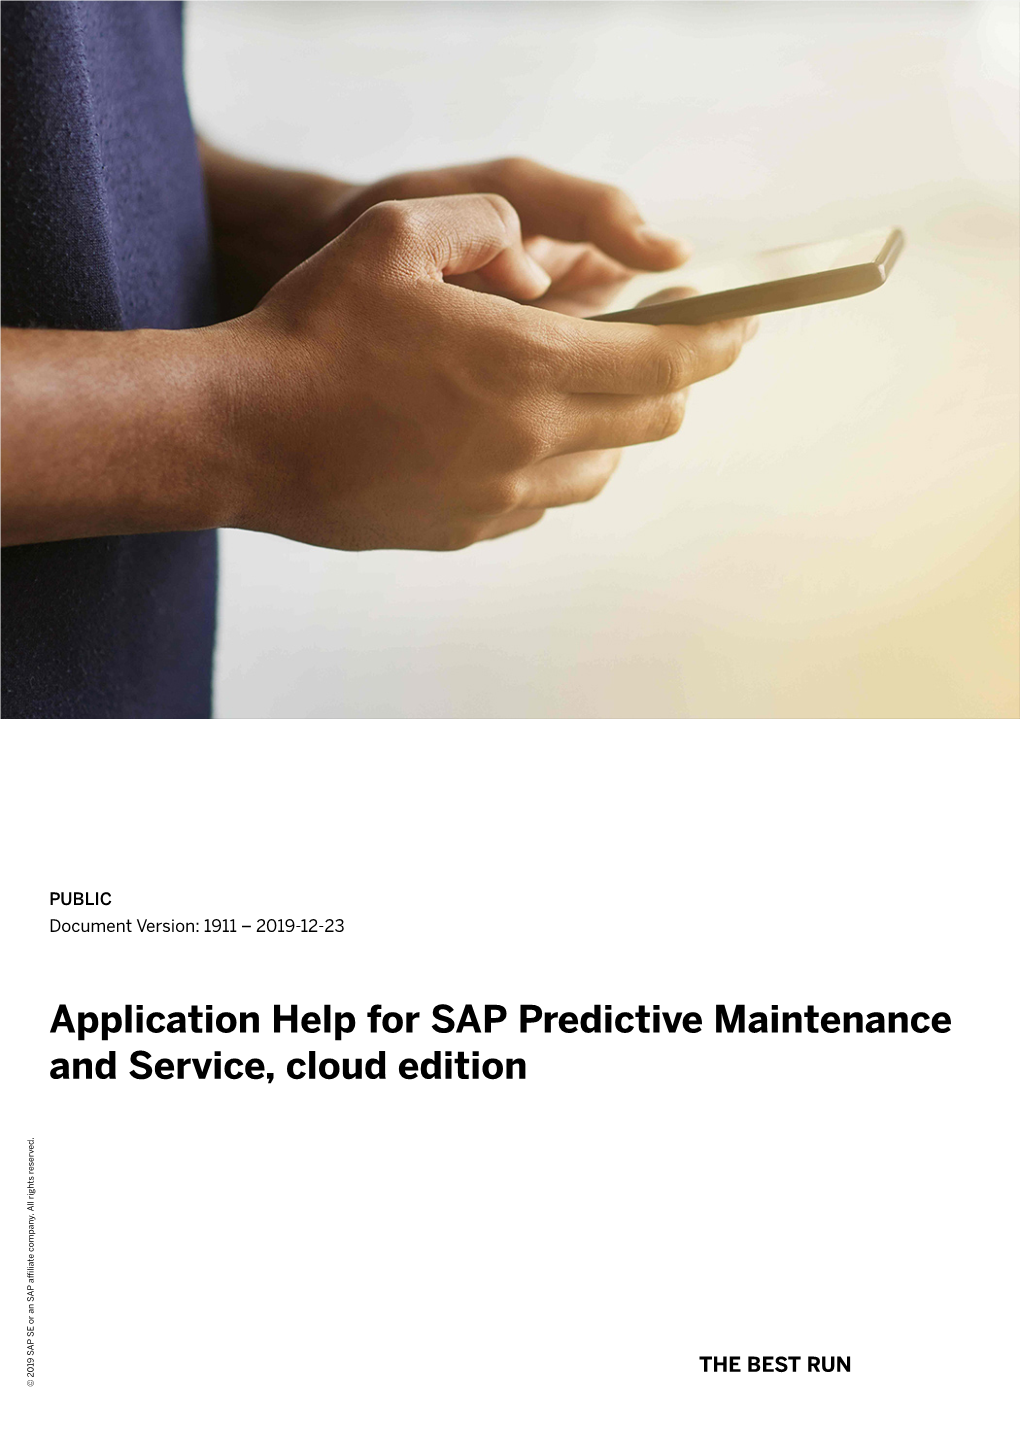 Application Help for SAP Predictive Maintenance and Service, Cloud Edition Company